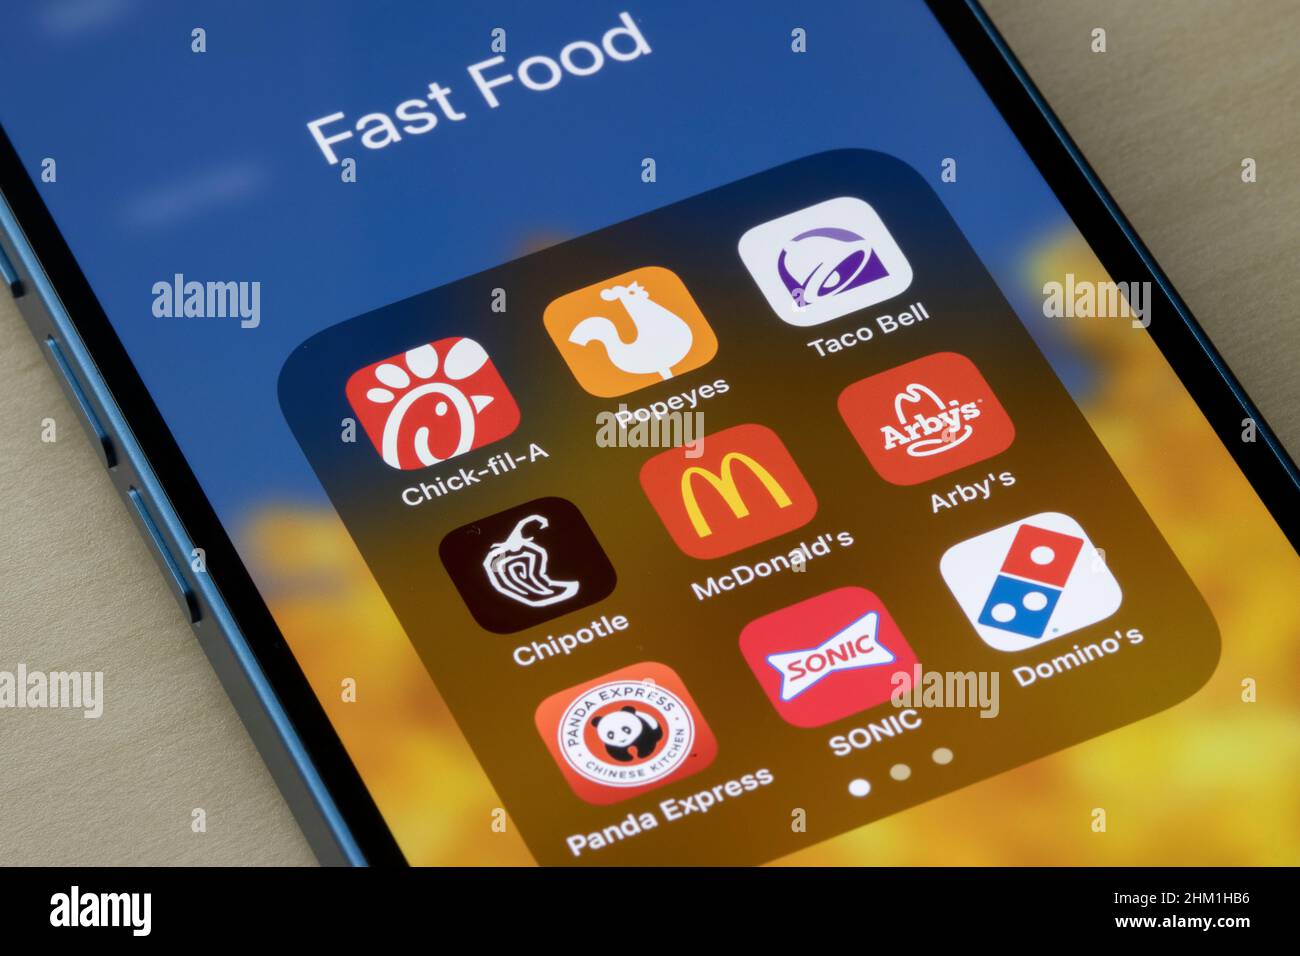 Assorted fast food chain apps are seen on an iPhone - Chick-fil-A, Popeyes, Taco Bell, Chipotle, McDonald's, Arby's, Panda Express, SONIC and Domino's. Stock Photo